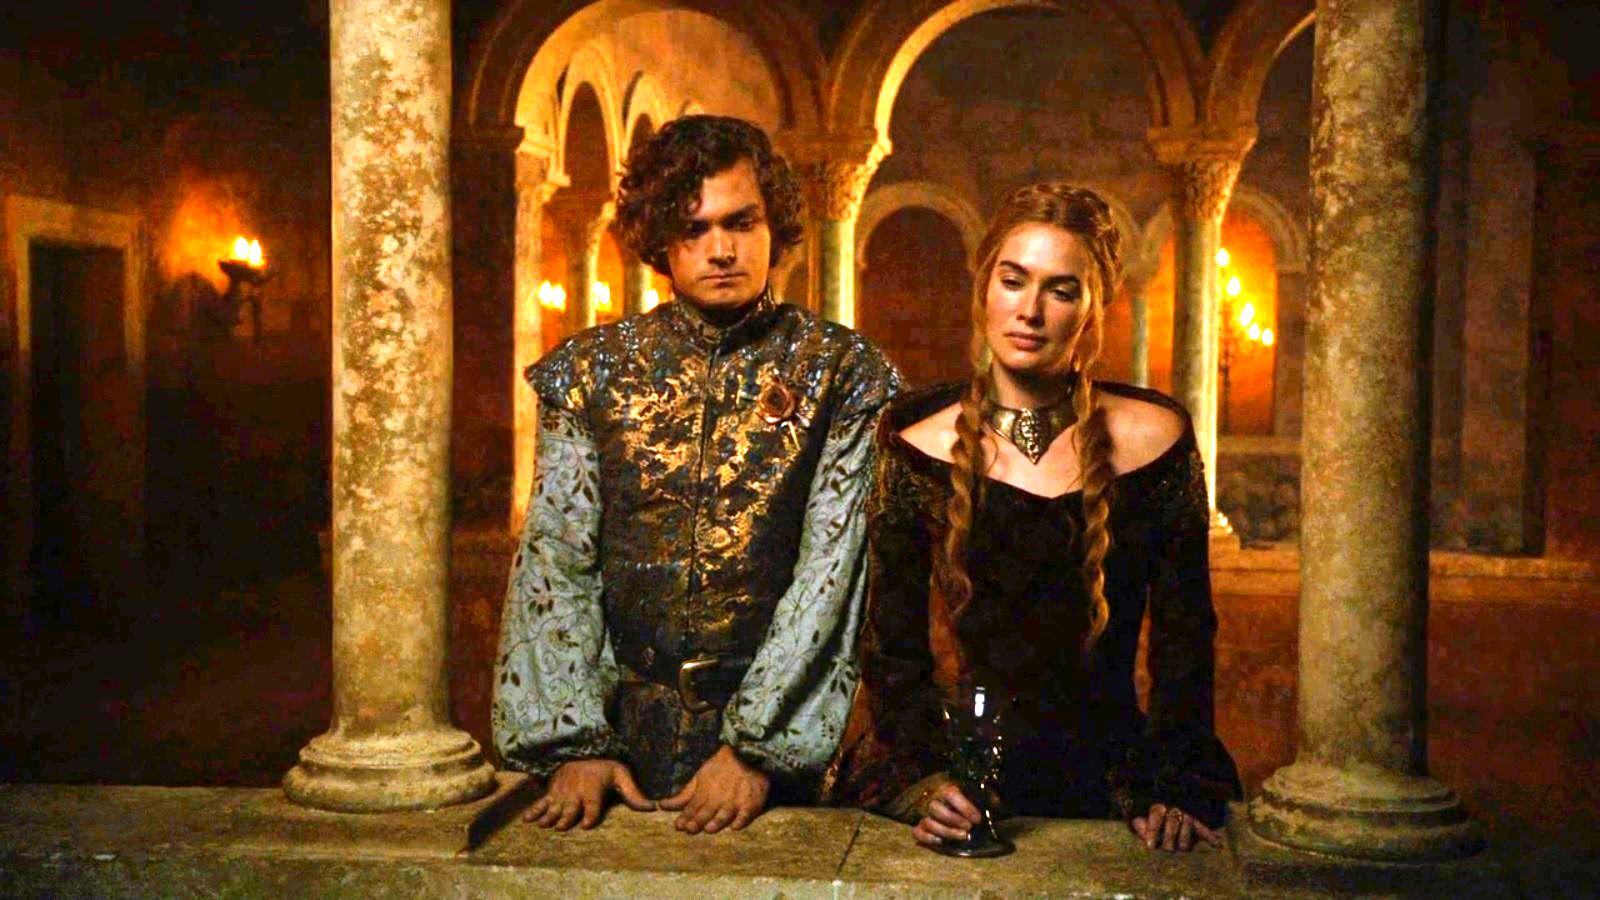 Cersei Lannister And Loras Tyrell - 1600x900 Wallpaper - teahub.io